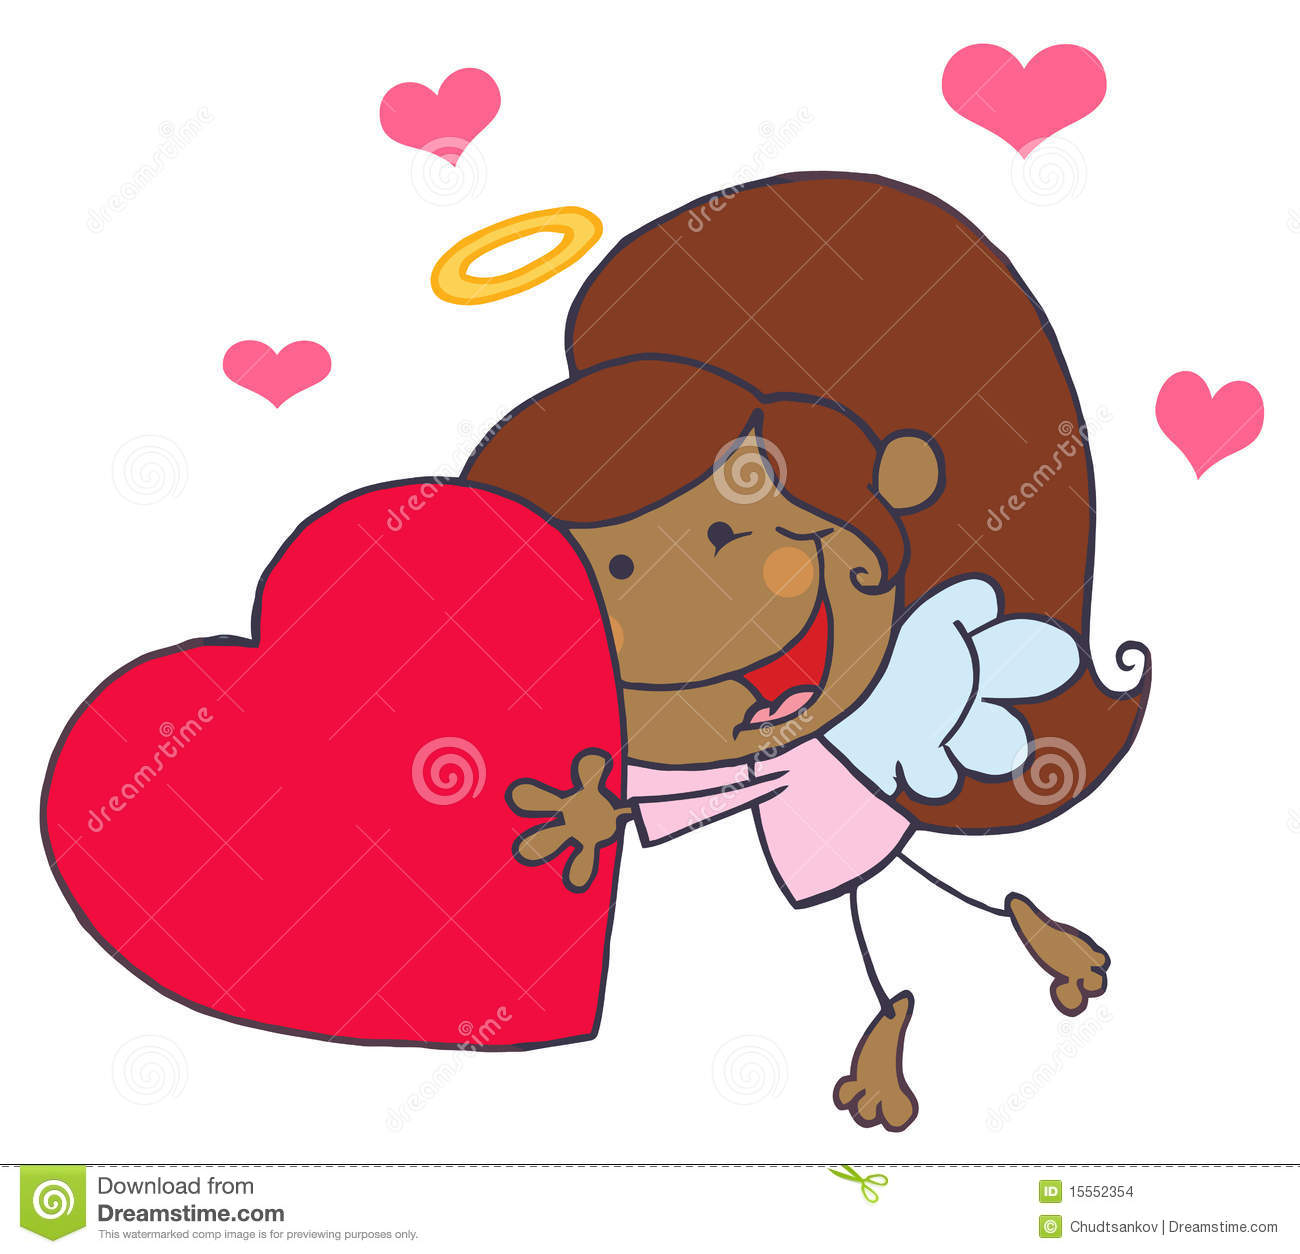     Similar Stock Images Of   Black Female Stick Cupid Holding A Heart